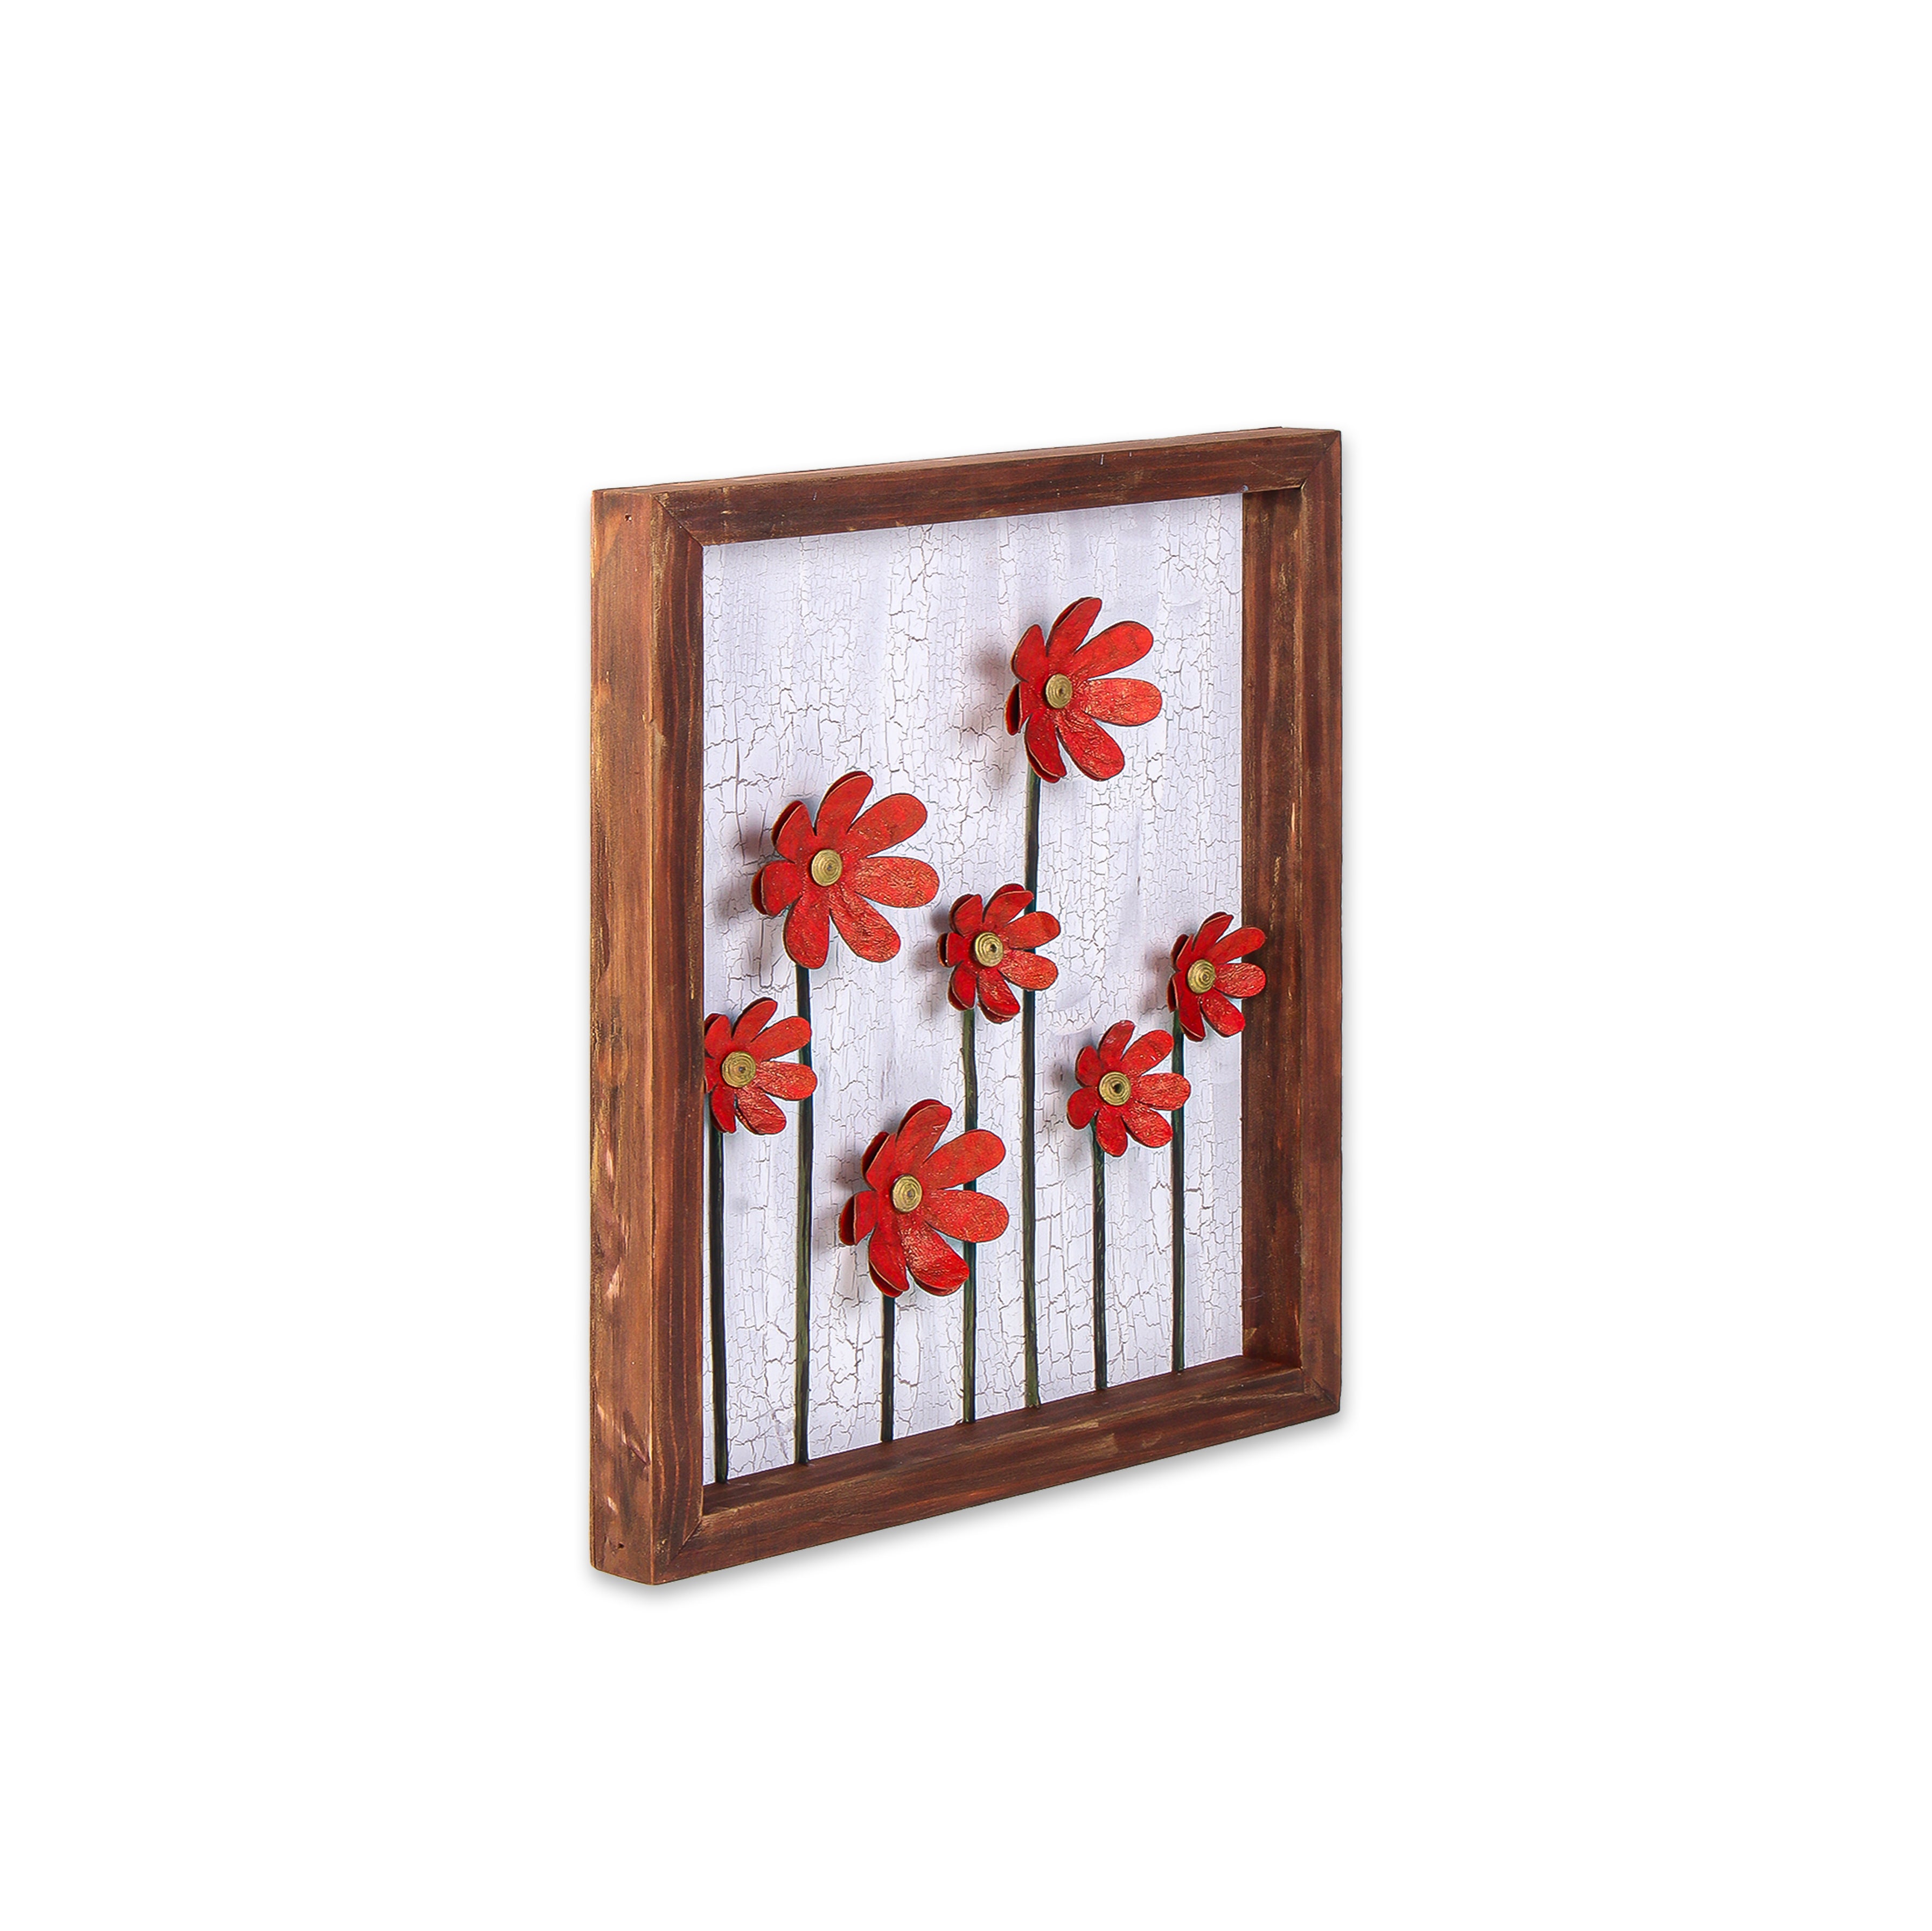 Wall Decor Handmade Daisy Field Red 3D Floral Art with Metallic Effect Approx H14 X L11 X D0.98inch